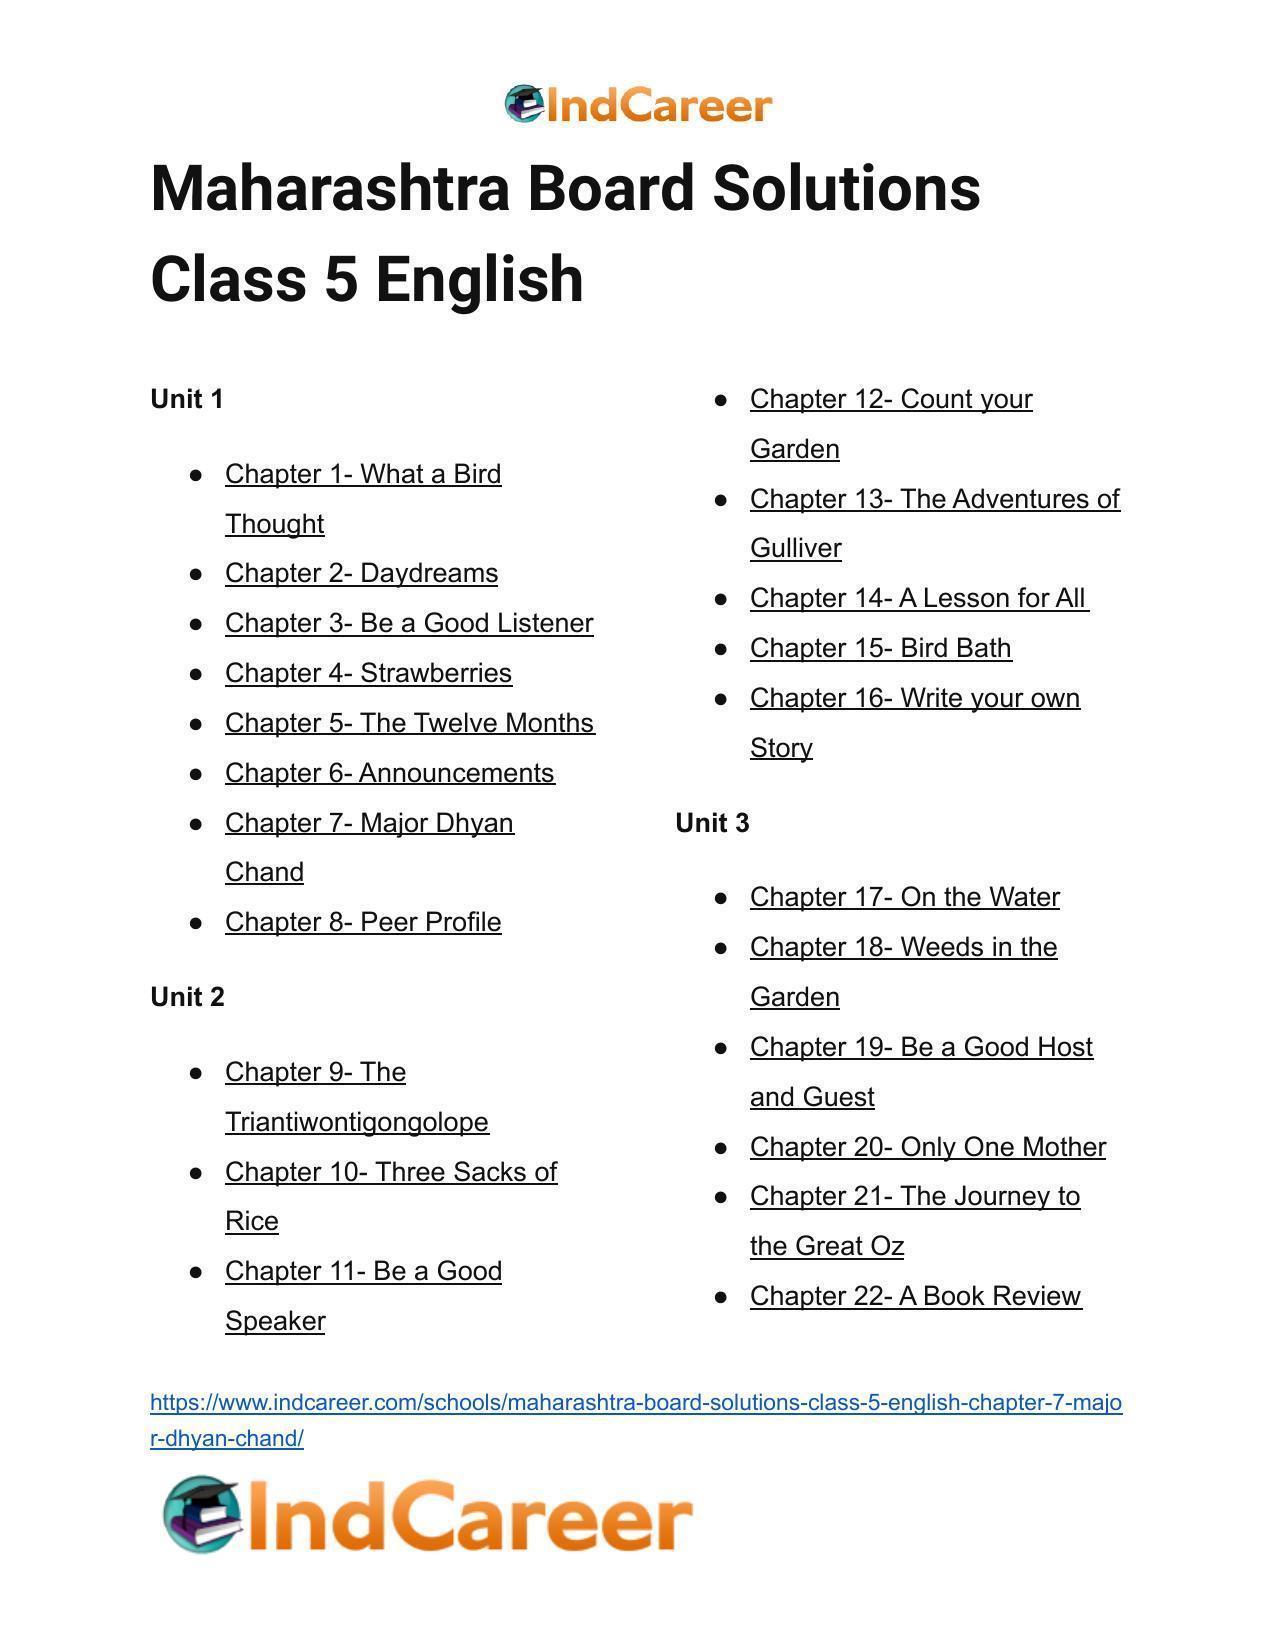 Maharashtra Board Solutions Class 5-English: Chapter 7- Major Dhyan Chand - Page 19